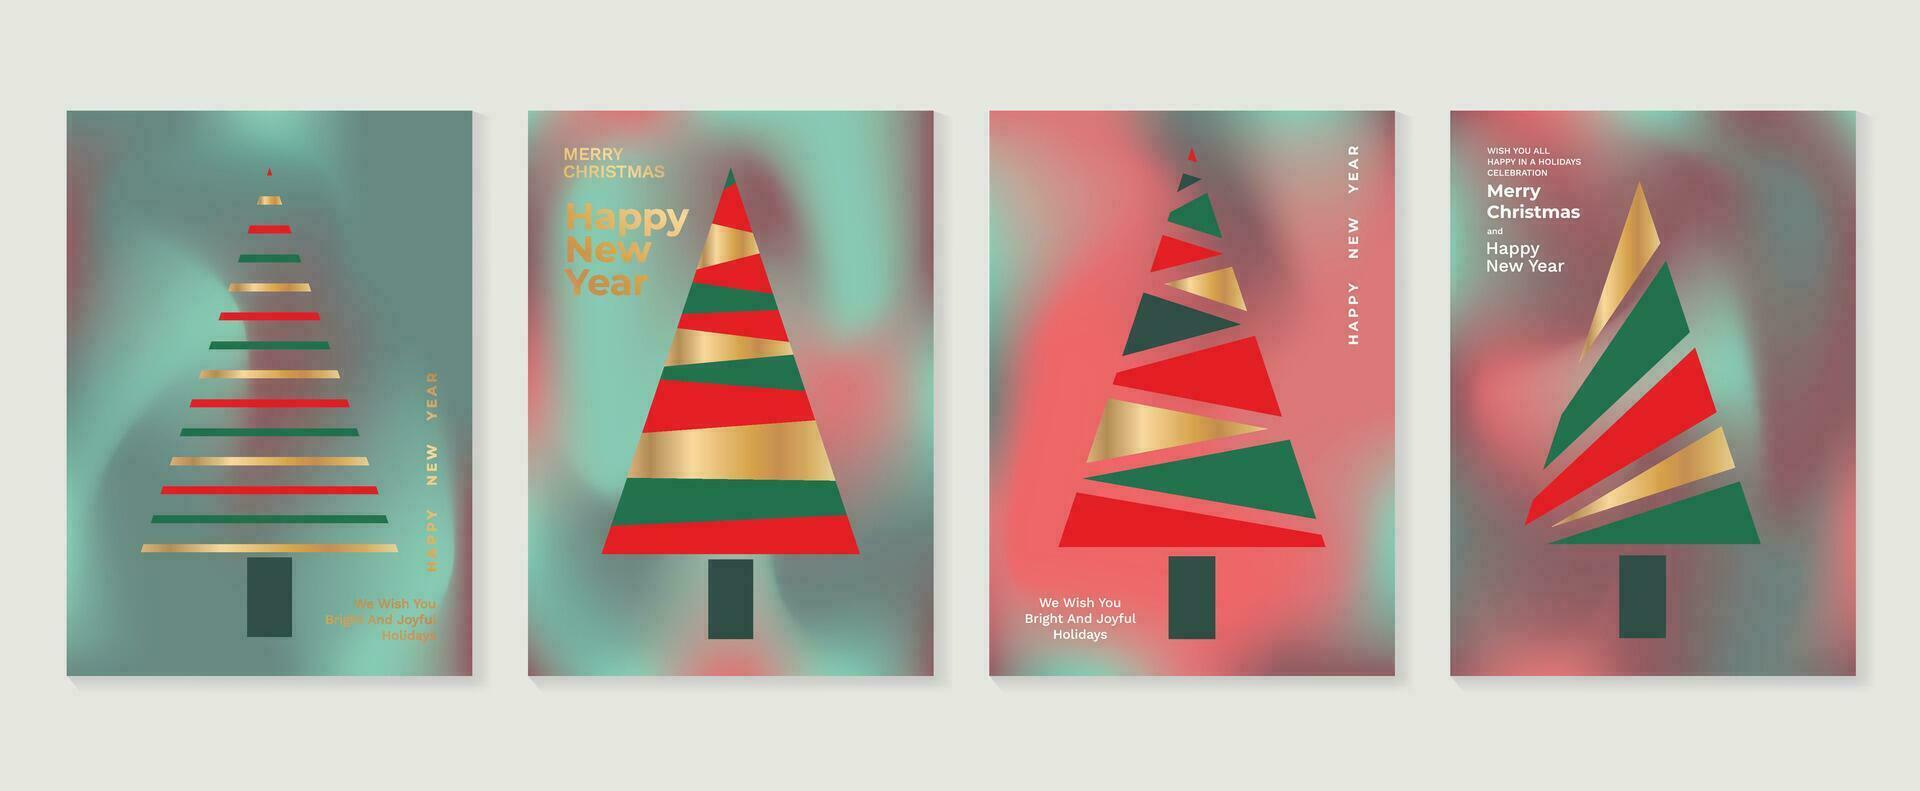 Merry christmas concept posters set. Cute gradient holographic background vector with vibrant color, christmas tree. Art trendy wallpaper design for social media, card, banner, flyer.